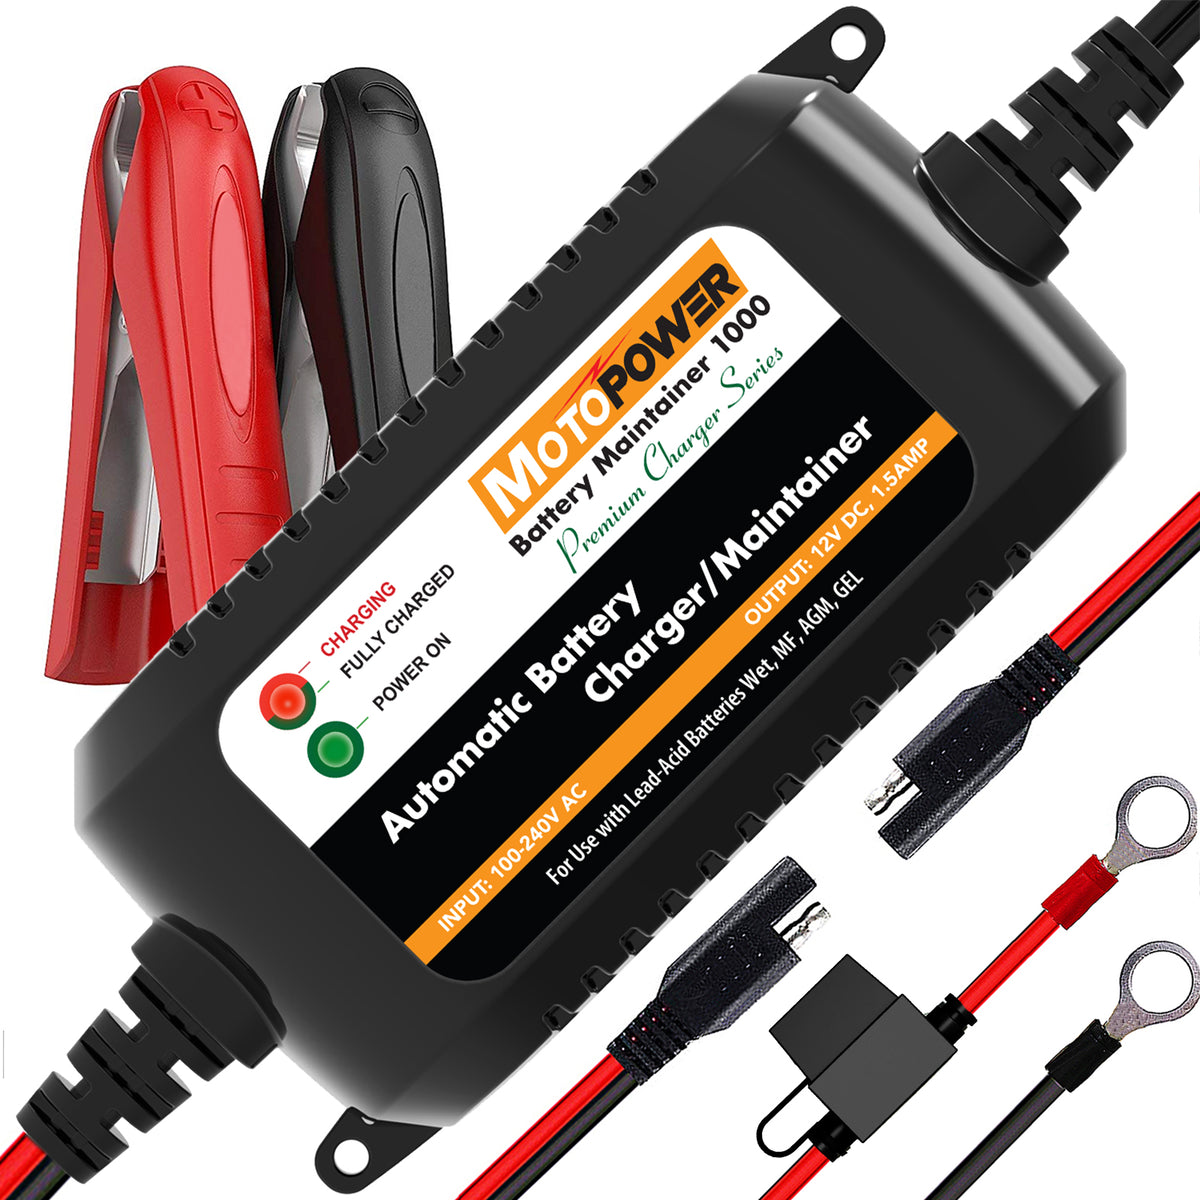 MOTOPOWER MP00206A 12V 1.5Amp Automatic Battery Charger, Battery Maintainer  for Cars, Motorcycles, ATVs, RVs, Powersports, Boat and More. Smart,